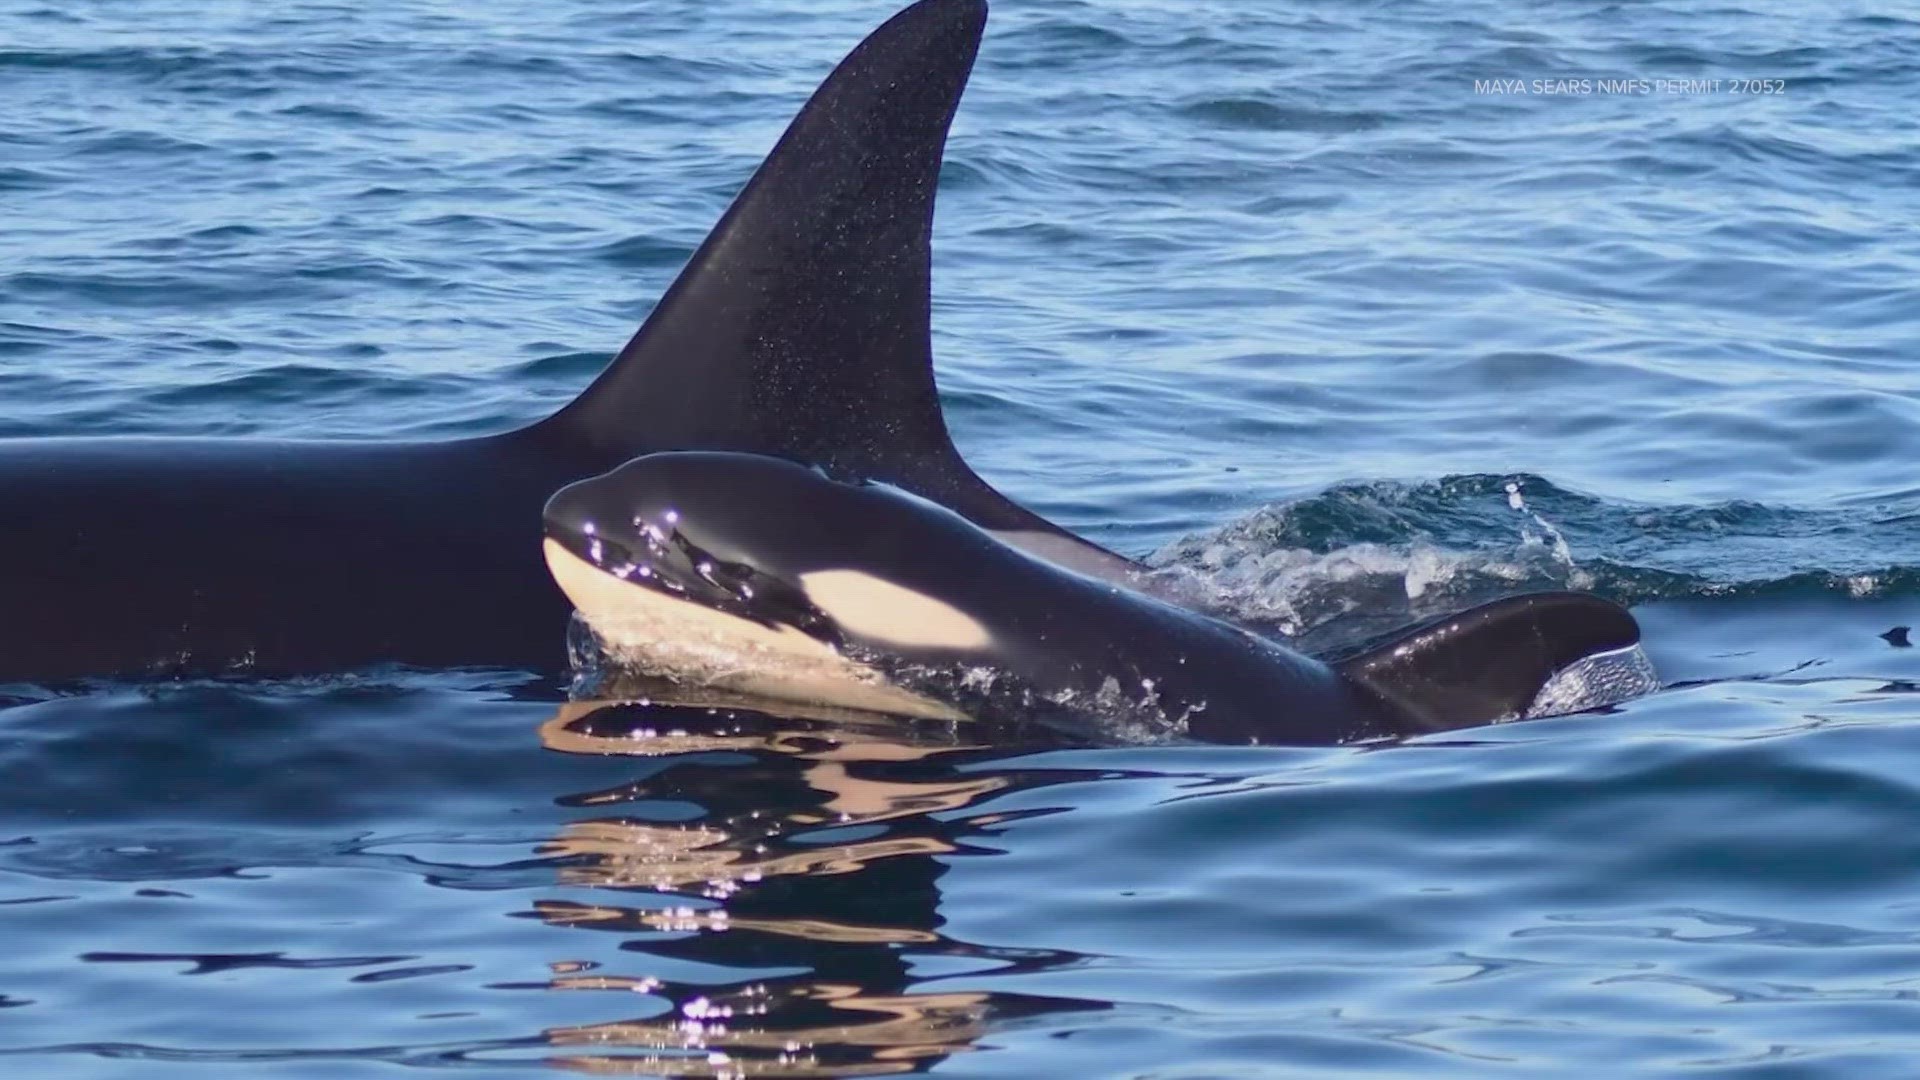 Orca expert says the first year of a calf's life is precarious, urges boaters to give the whales plenty of distance and a chance to survive.